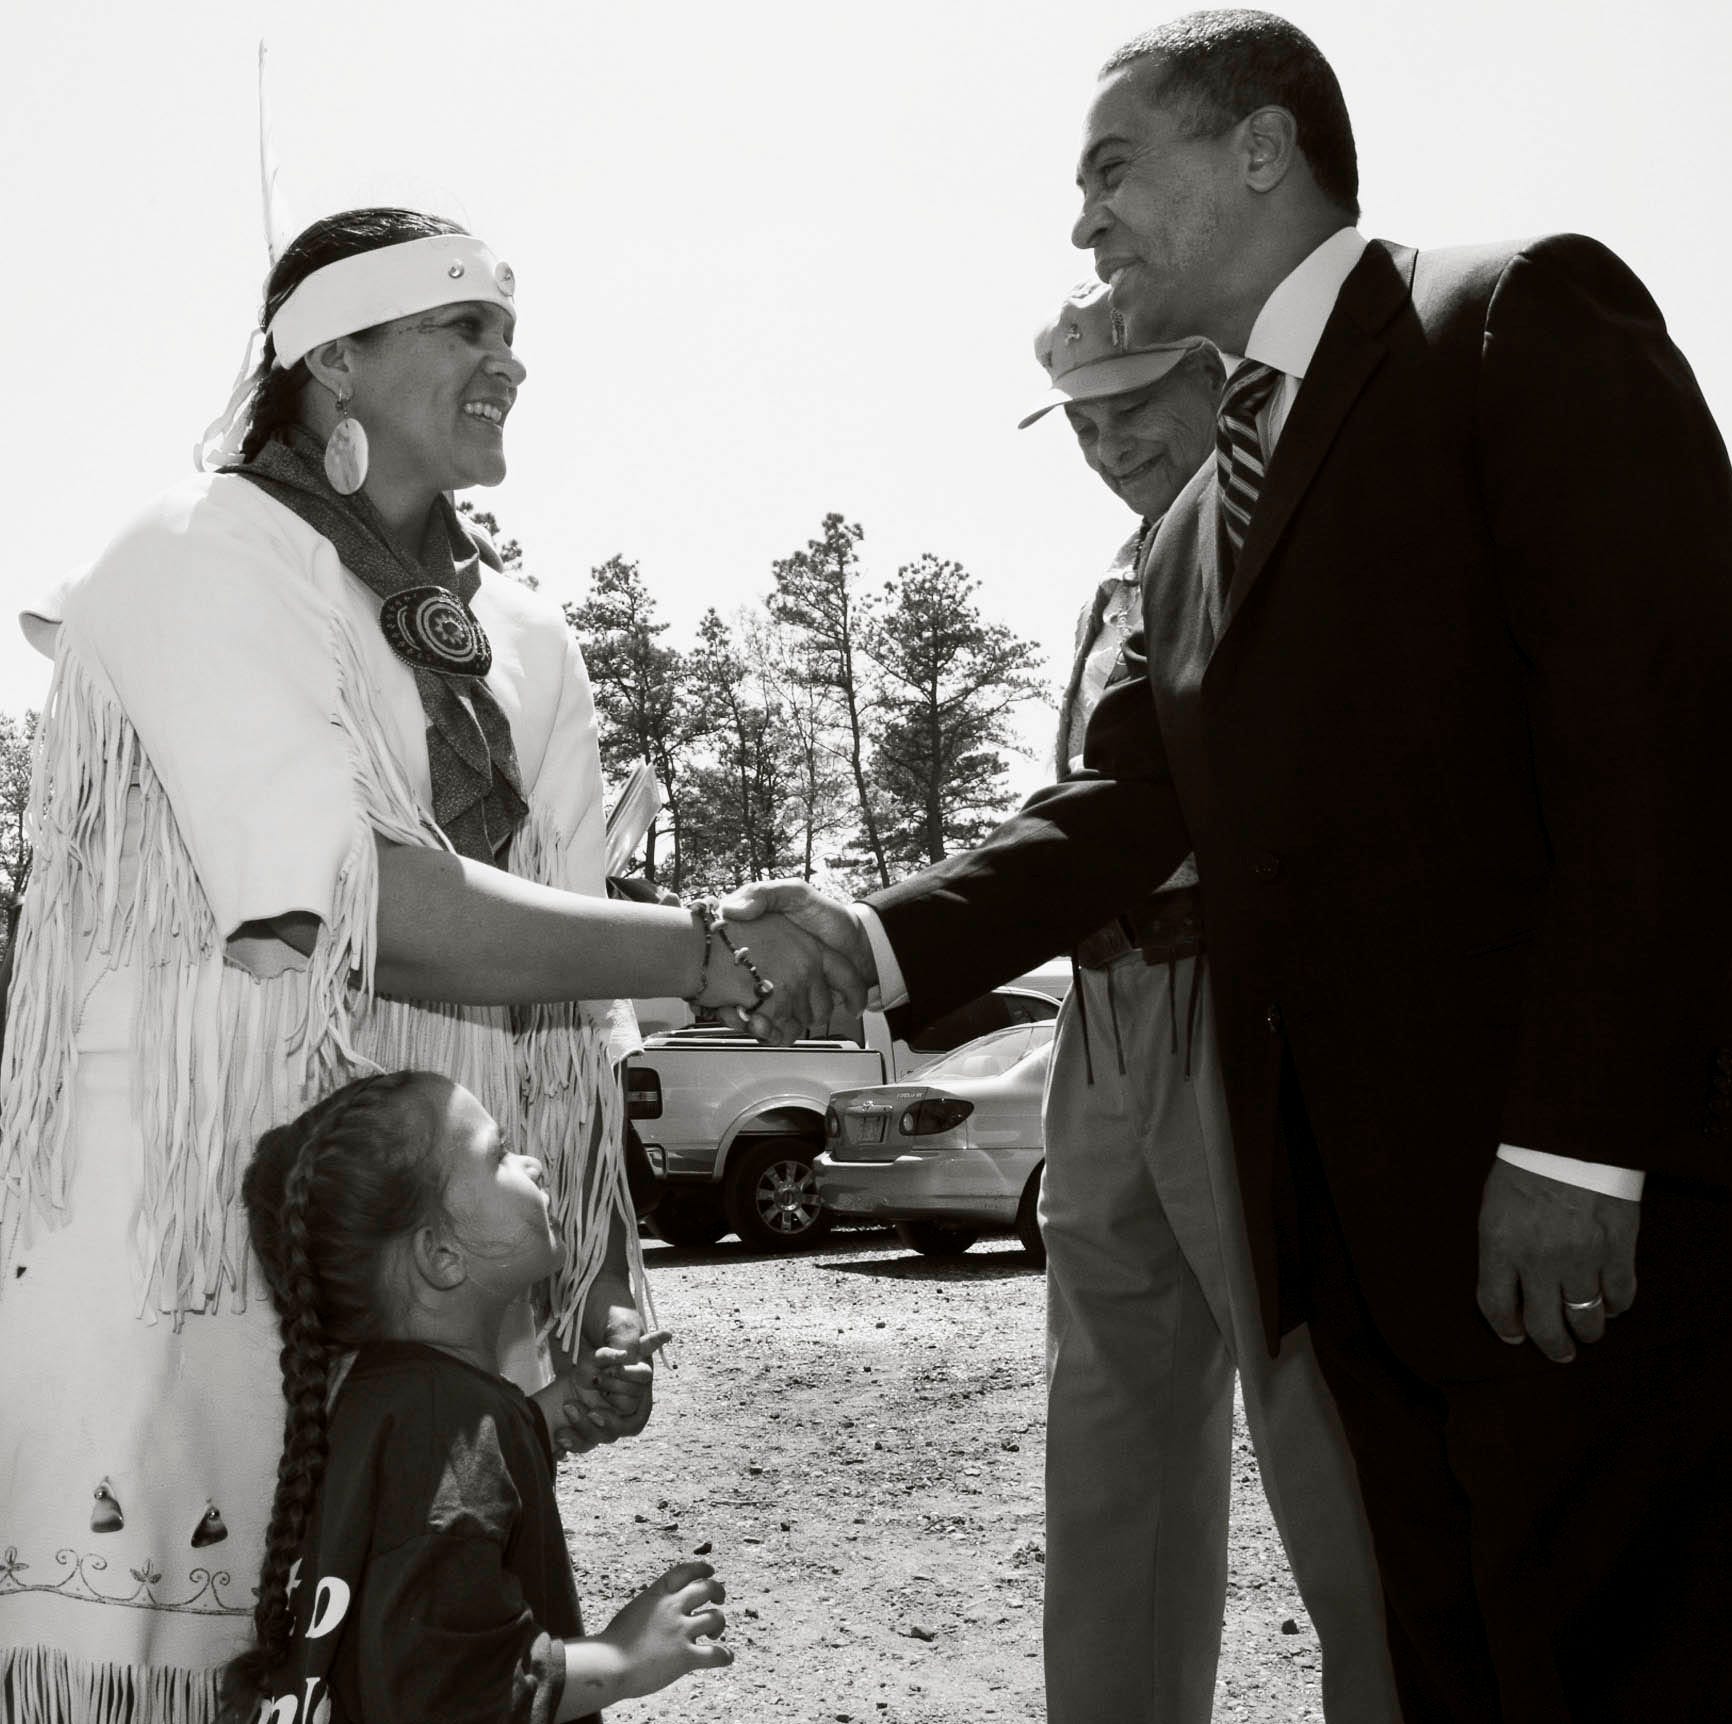 Mashpee Wampanoag tribal citizen Jessie "Little Doe" Baird shakes hands with Massachusetts Gov. Deval Patrick in 2007 during his visit to tribal headquarters to congratulate the tribe on its official recognition by the federal government. Baird's daughter, Mae Alice, and Tribal Chief Vernon Lopez look on.